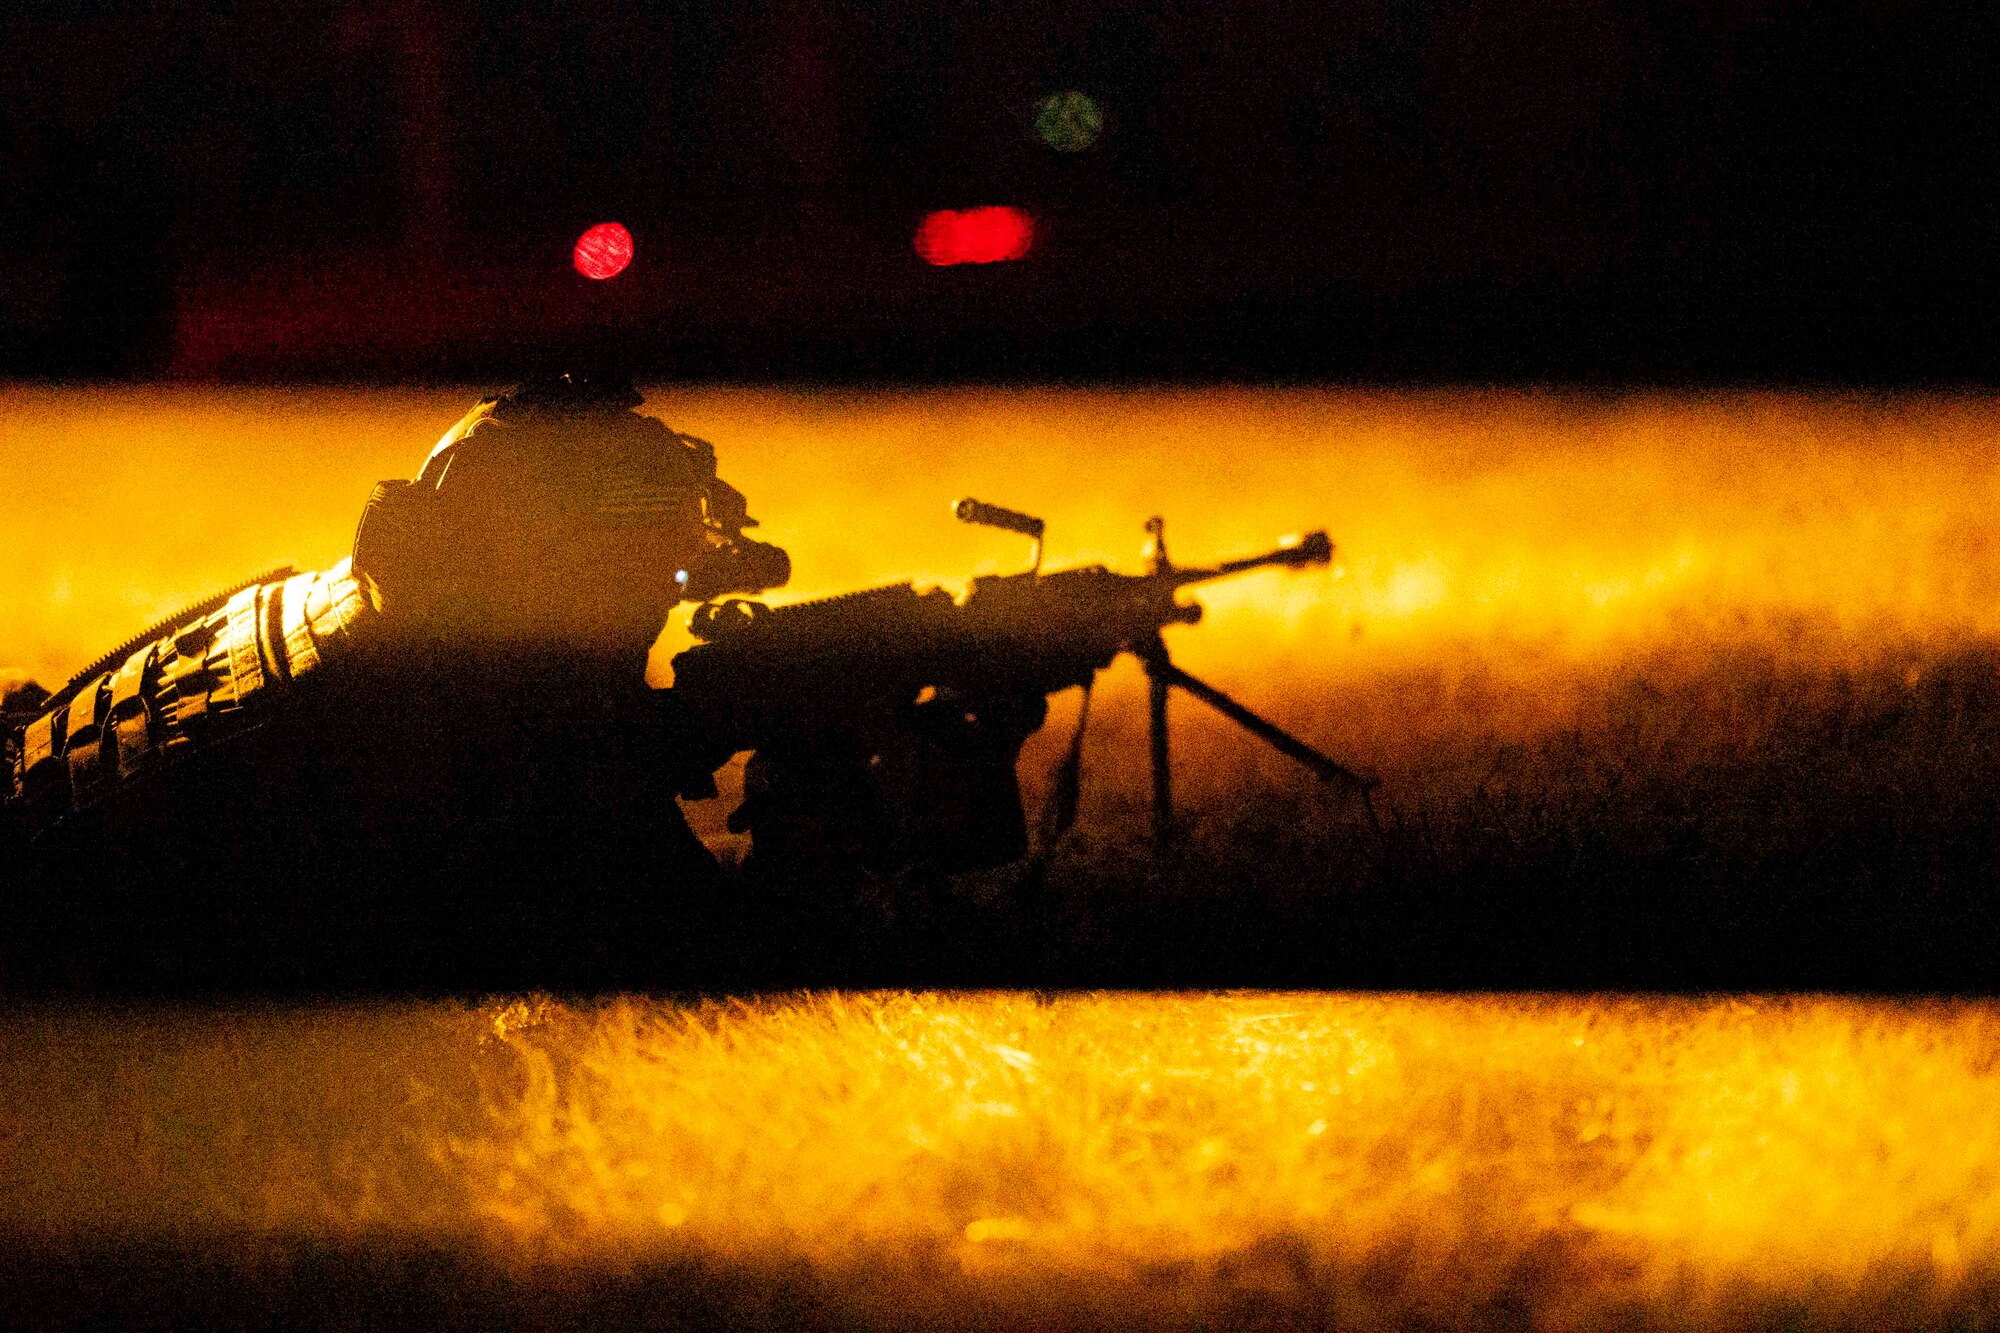 A member of the 27th Special Operations Mission Support Group Mission Sustainment Team 1 aims their weapon